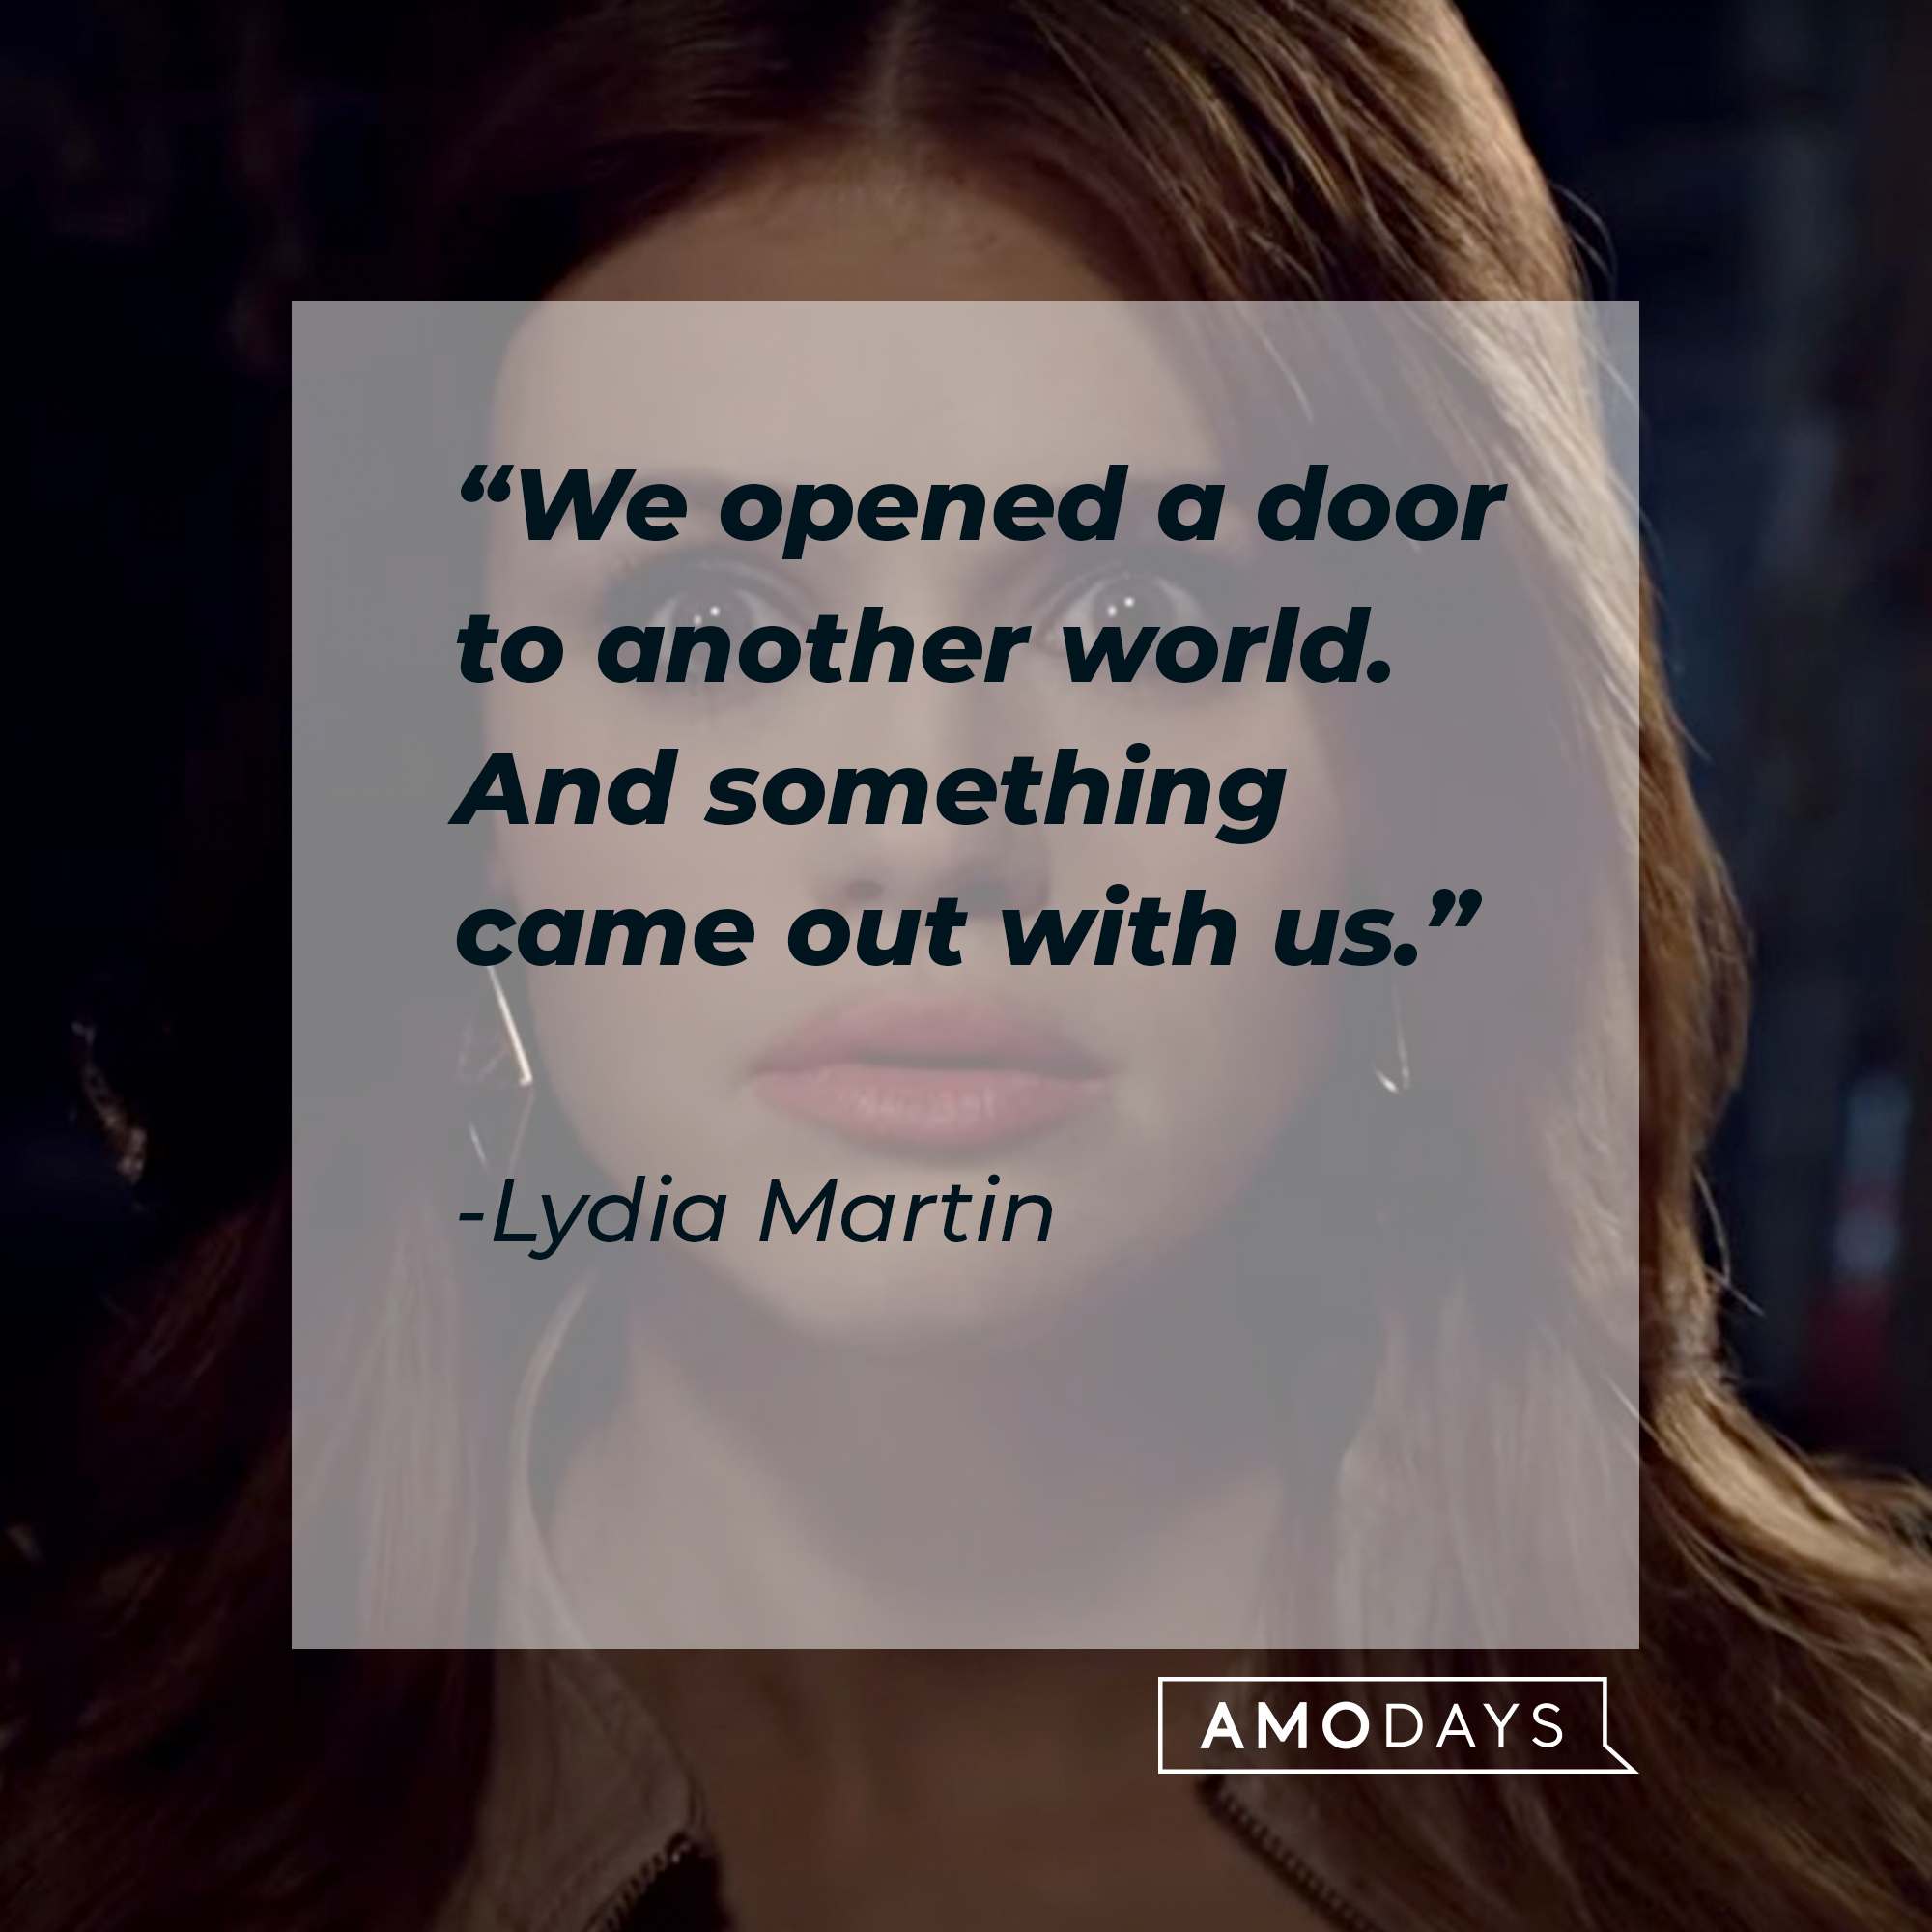 Lydia Martin with her quote: “We opened a door to another world. And something came out with us.” | Source: facebook.com/TeenWolf